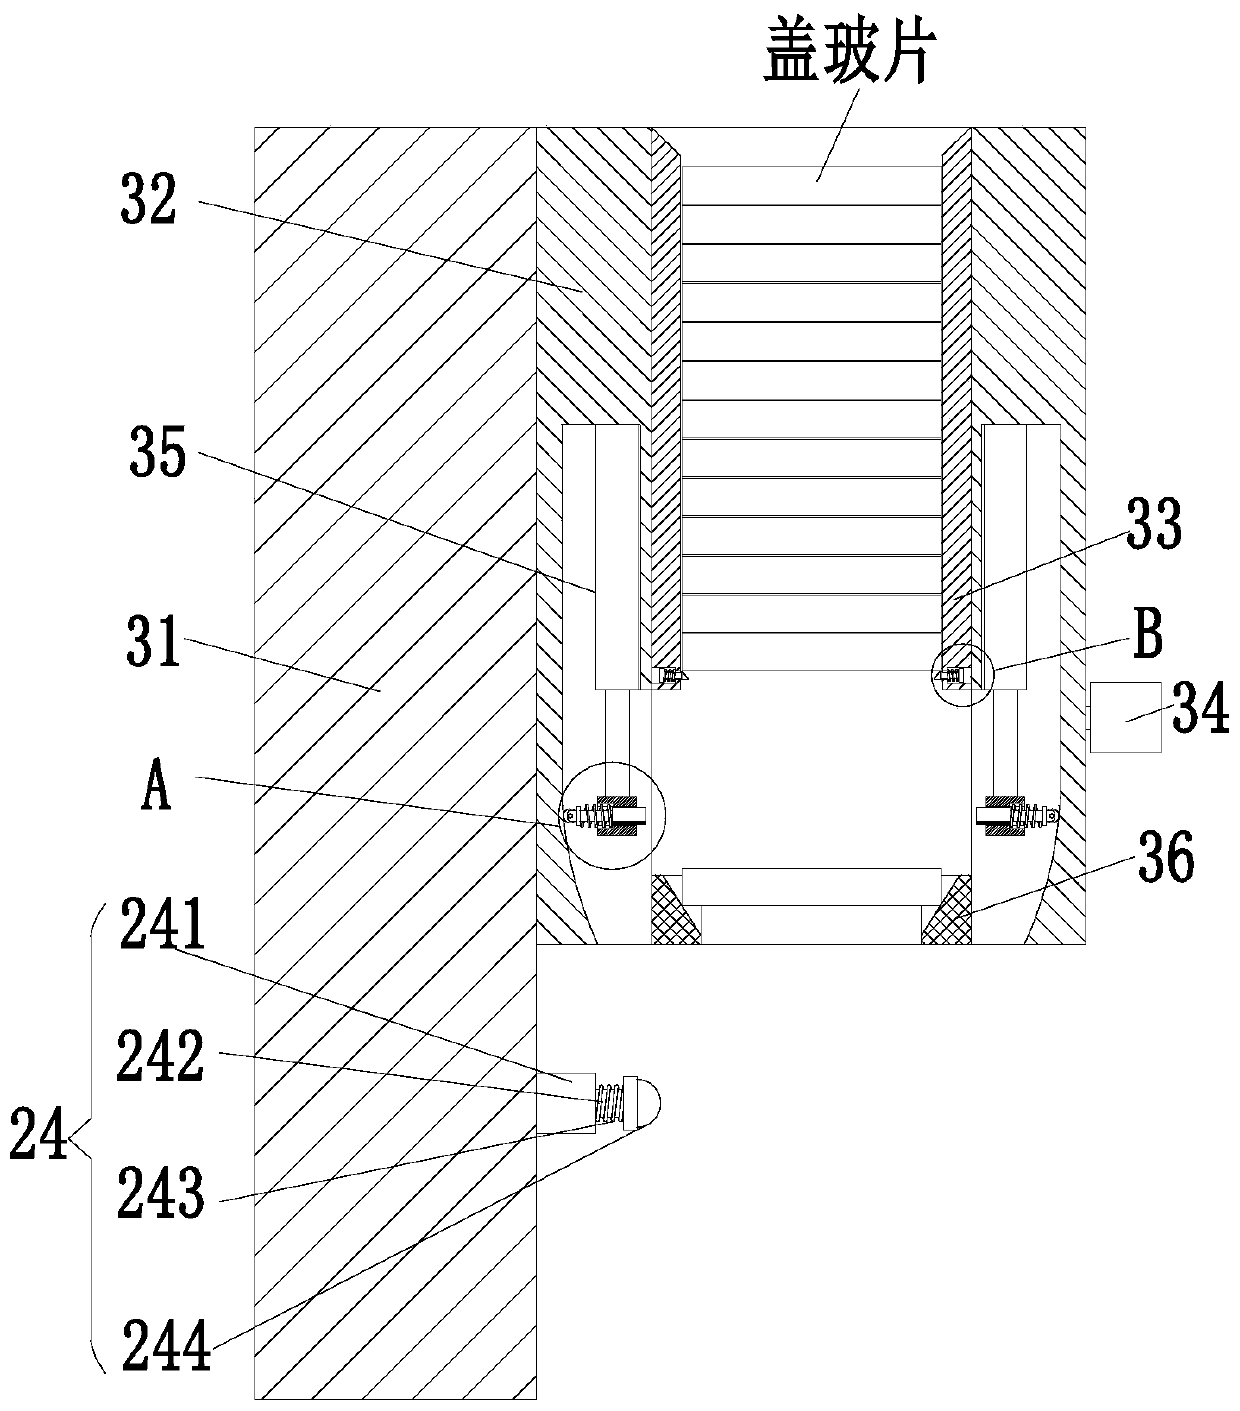 Chip mounting device for processing plant tissue slices serving as medical detection accessories